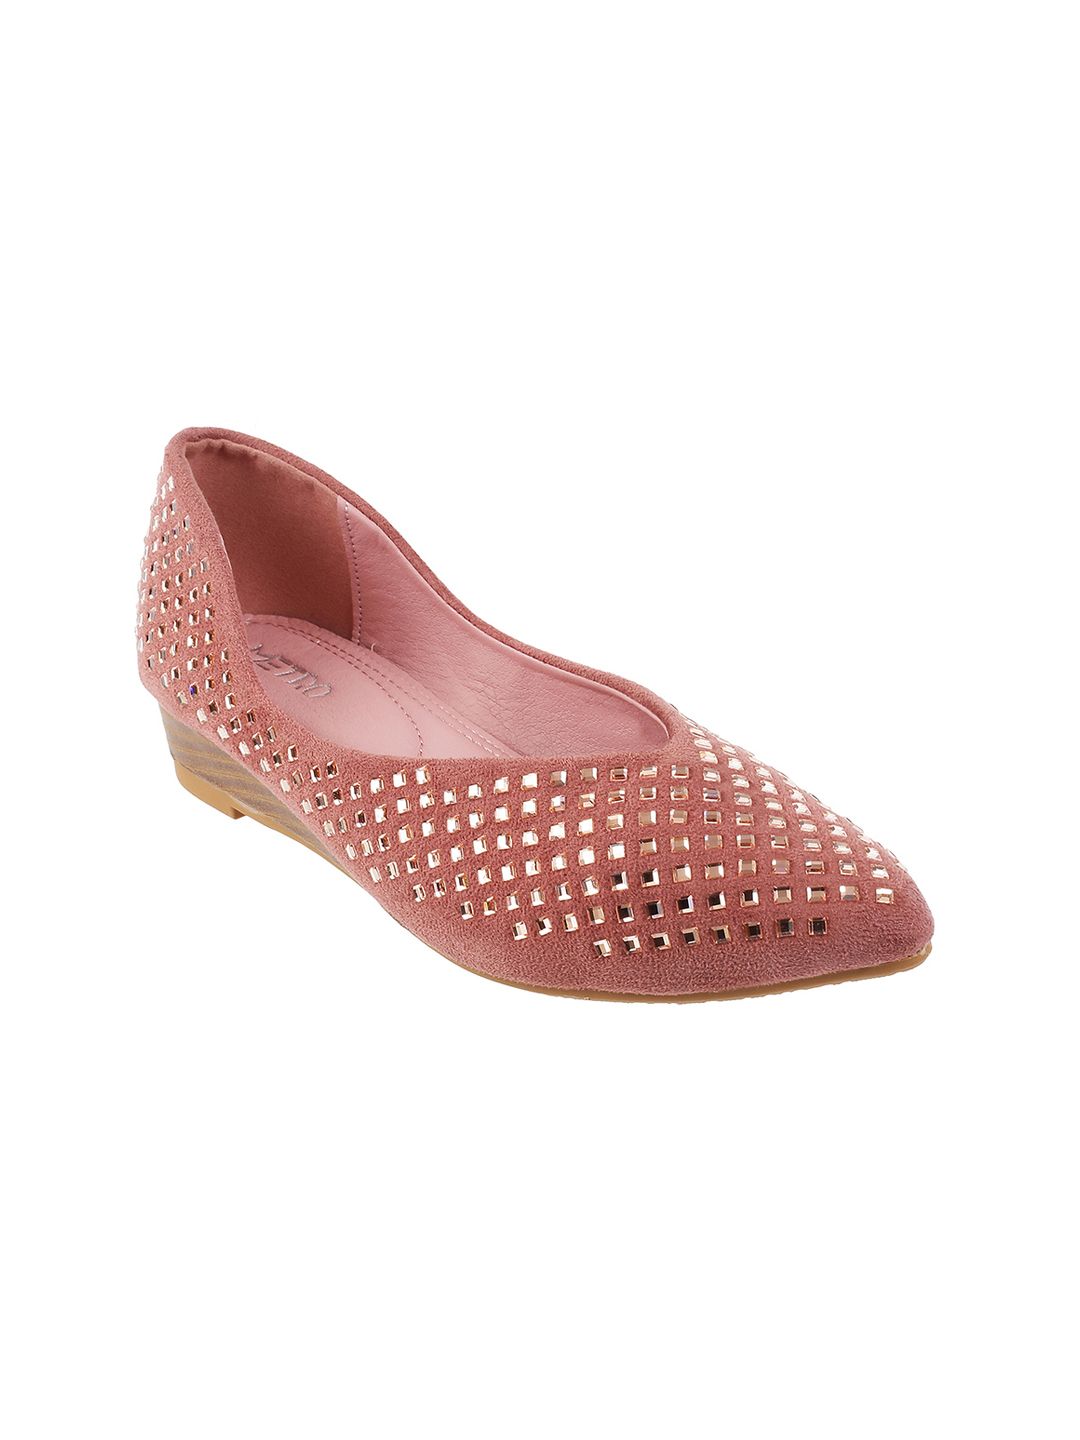 Metro Women Pink & Gold-Toned Embellished Pumps Price in India